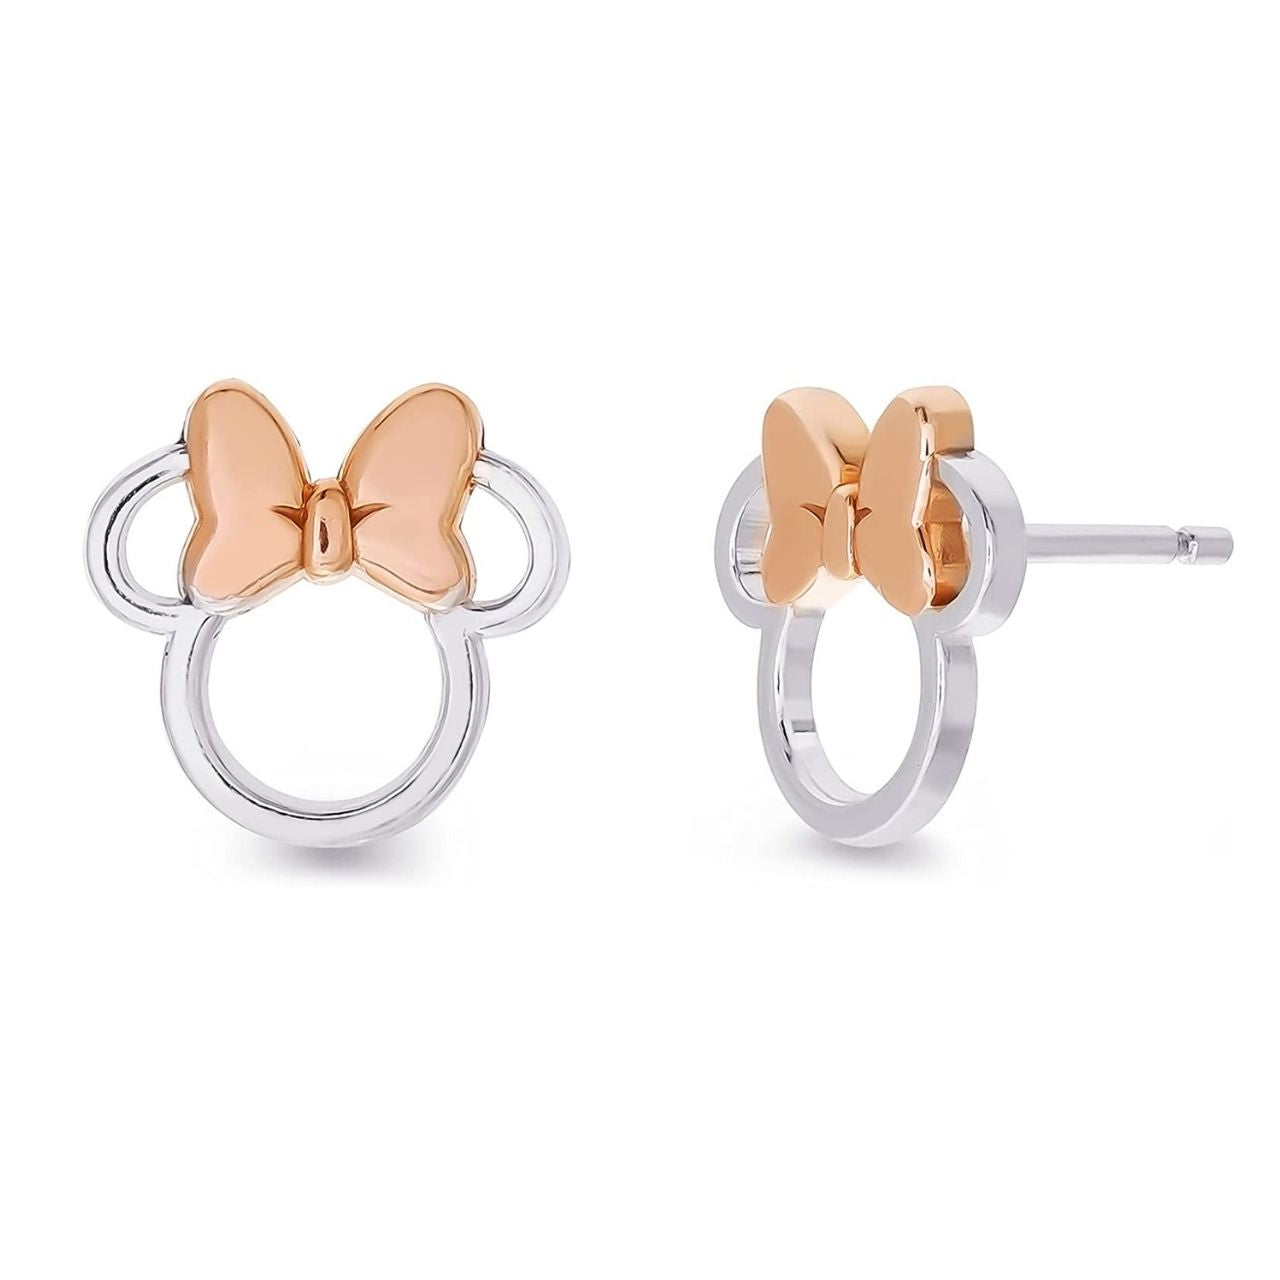 Peers Hardy Disney Minnie Mouse Head Sterling Silver Stud Earrings  Stunning silver stud earrings form a silhouette of Minnie Mouse's Head and her classic bow plated in pink, adding a Feminine touch to the Classic piece of Jewellery  Trendy and fashionable two tone design, the Disney Minnie Mouse Silhouette Sterling Silver Stud Earrings add a chic, fun touch to any outfit.